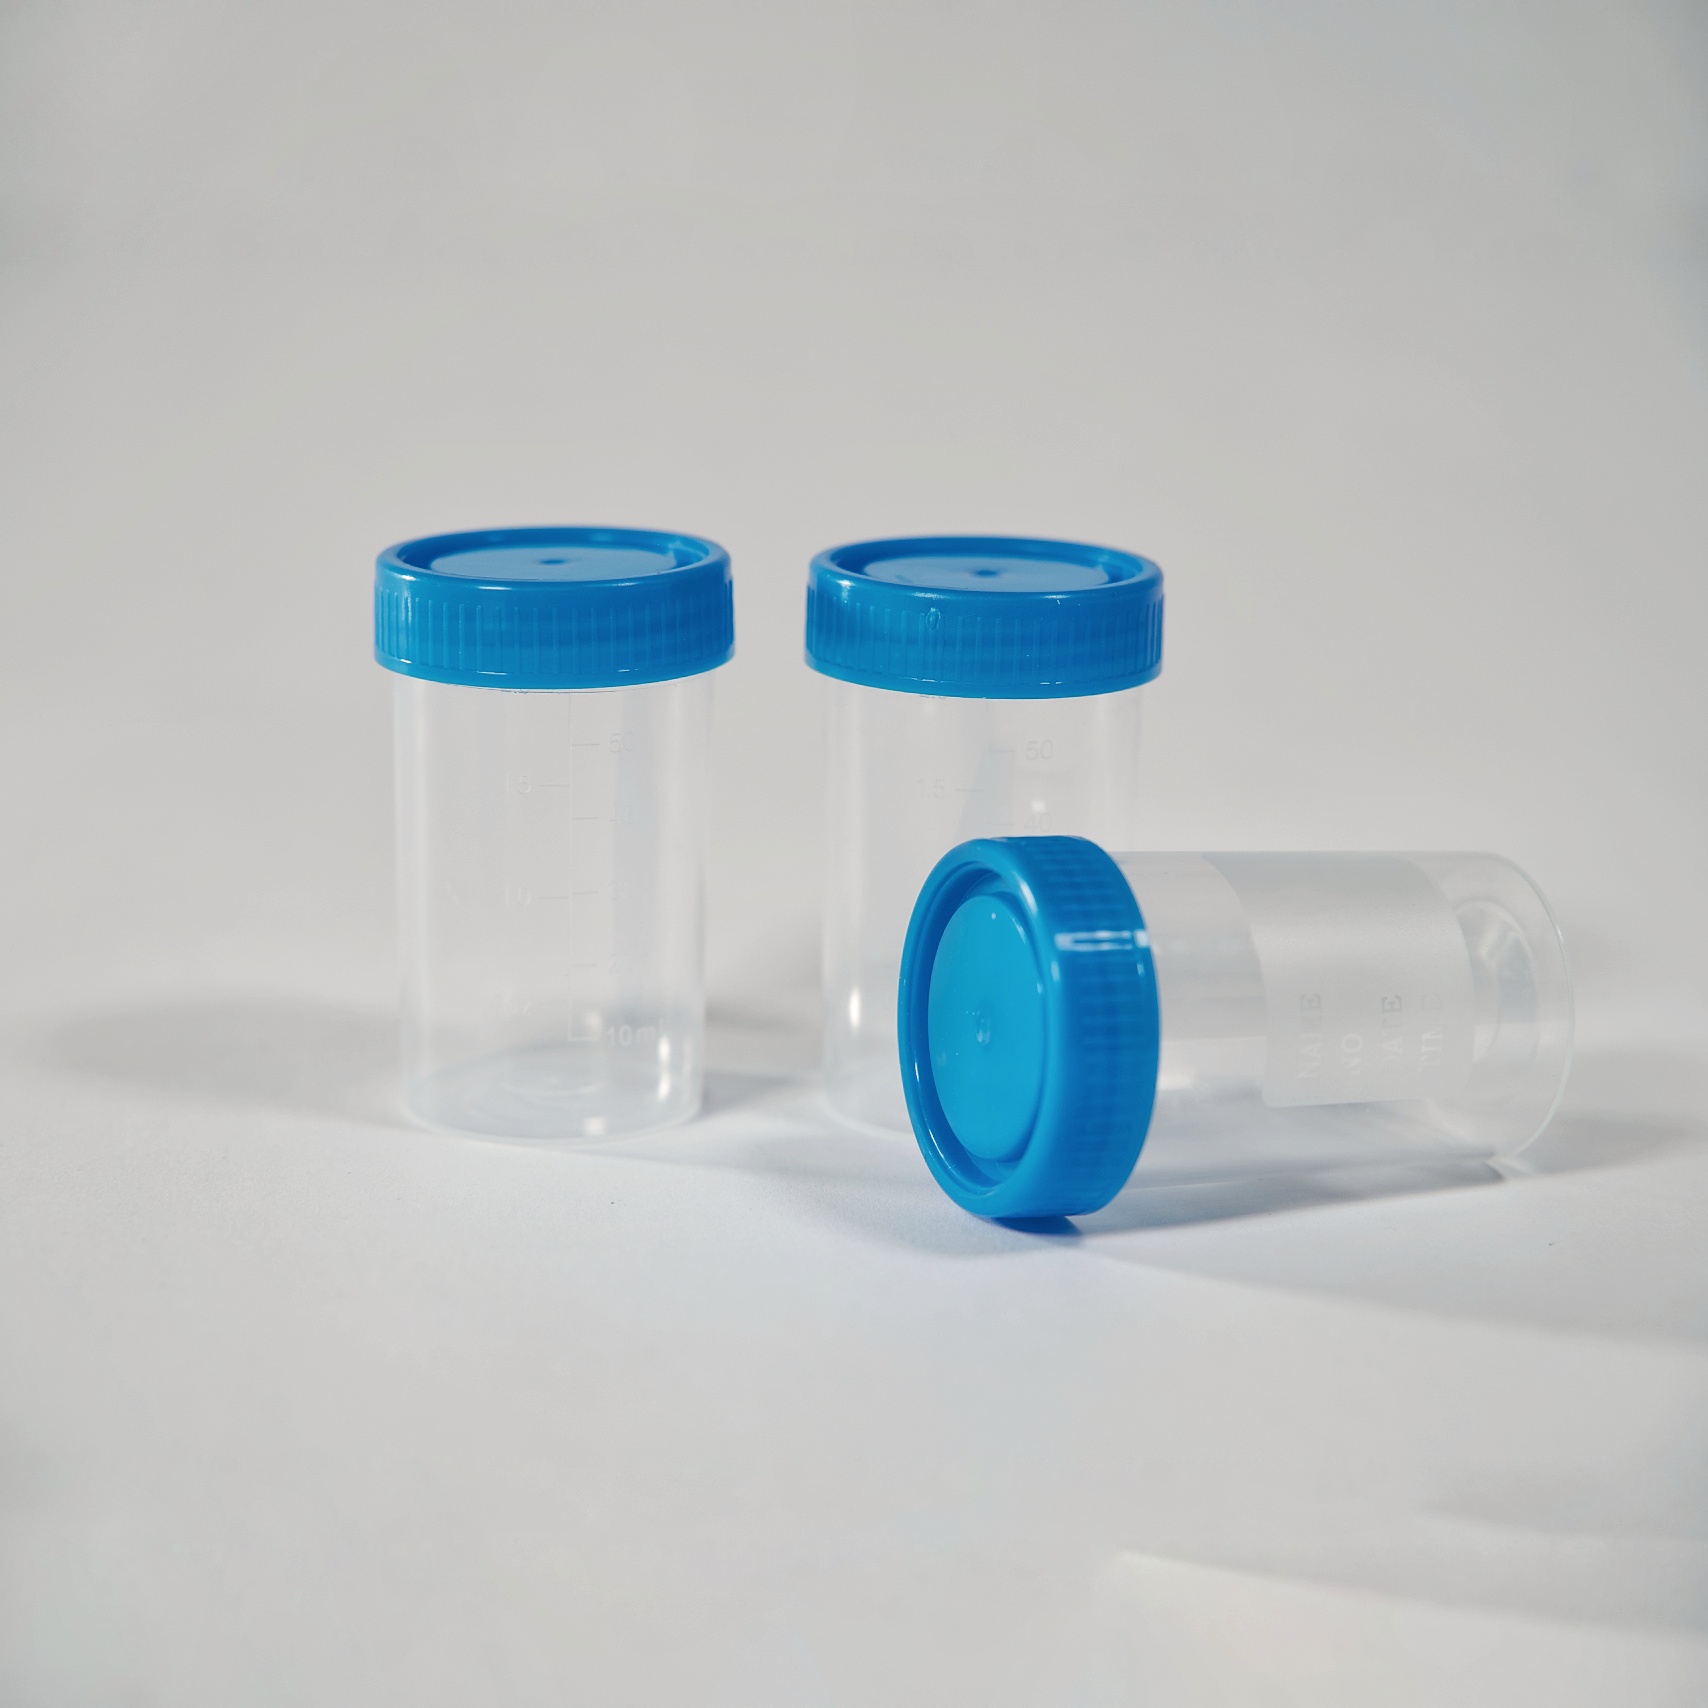 Good quality Plastic Stick - Disposable PP urine containers with various caps in hospitals, schools and laboratories – Benoy